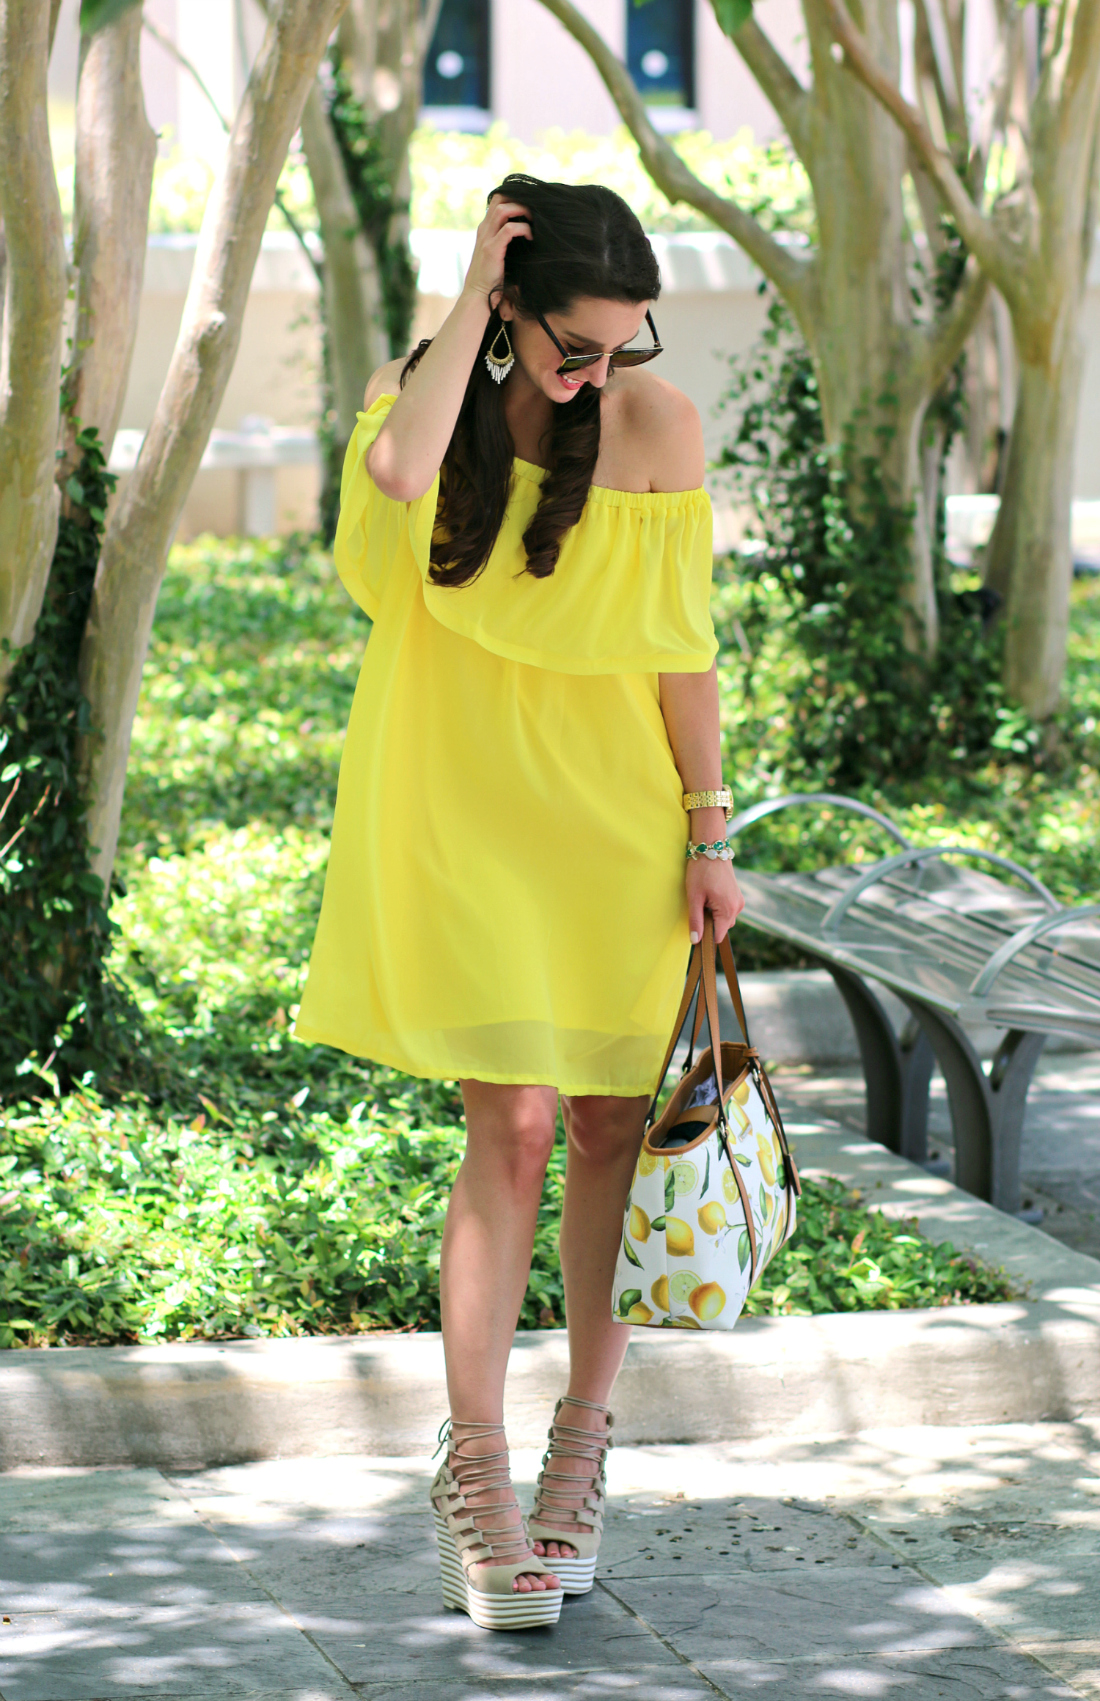 Best Dresses to Wear to a Spring Wedding by southern fashion blogger Stephanie Ziajka from Diary of a Debutante, spring wedding guest outfits, wedding guest dress ideas, dresses to wear to a spring wedding, yellow off the shoulder swing dress